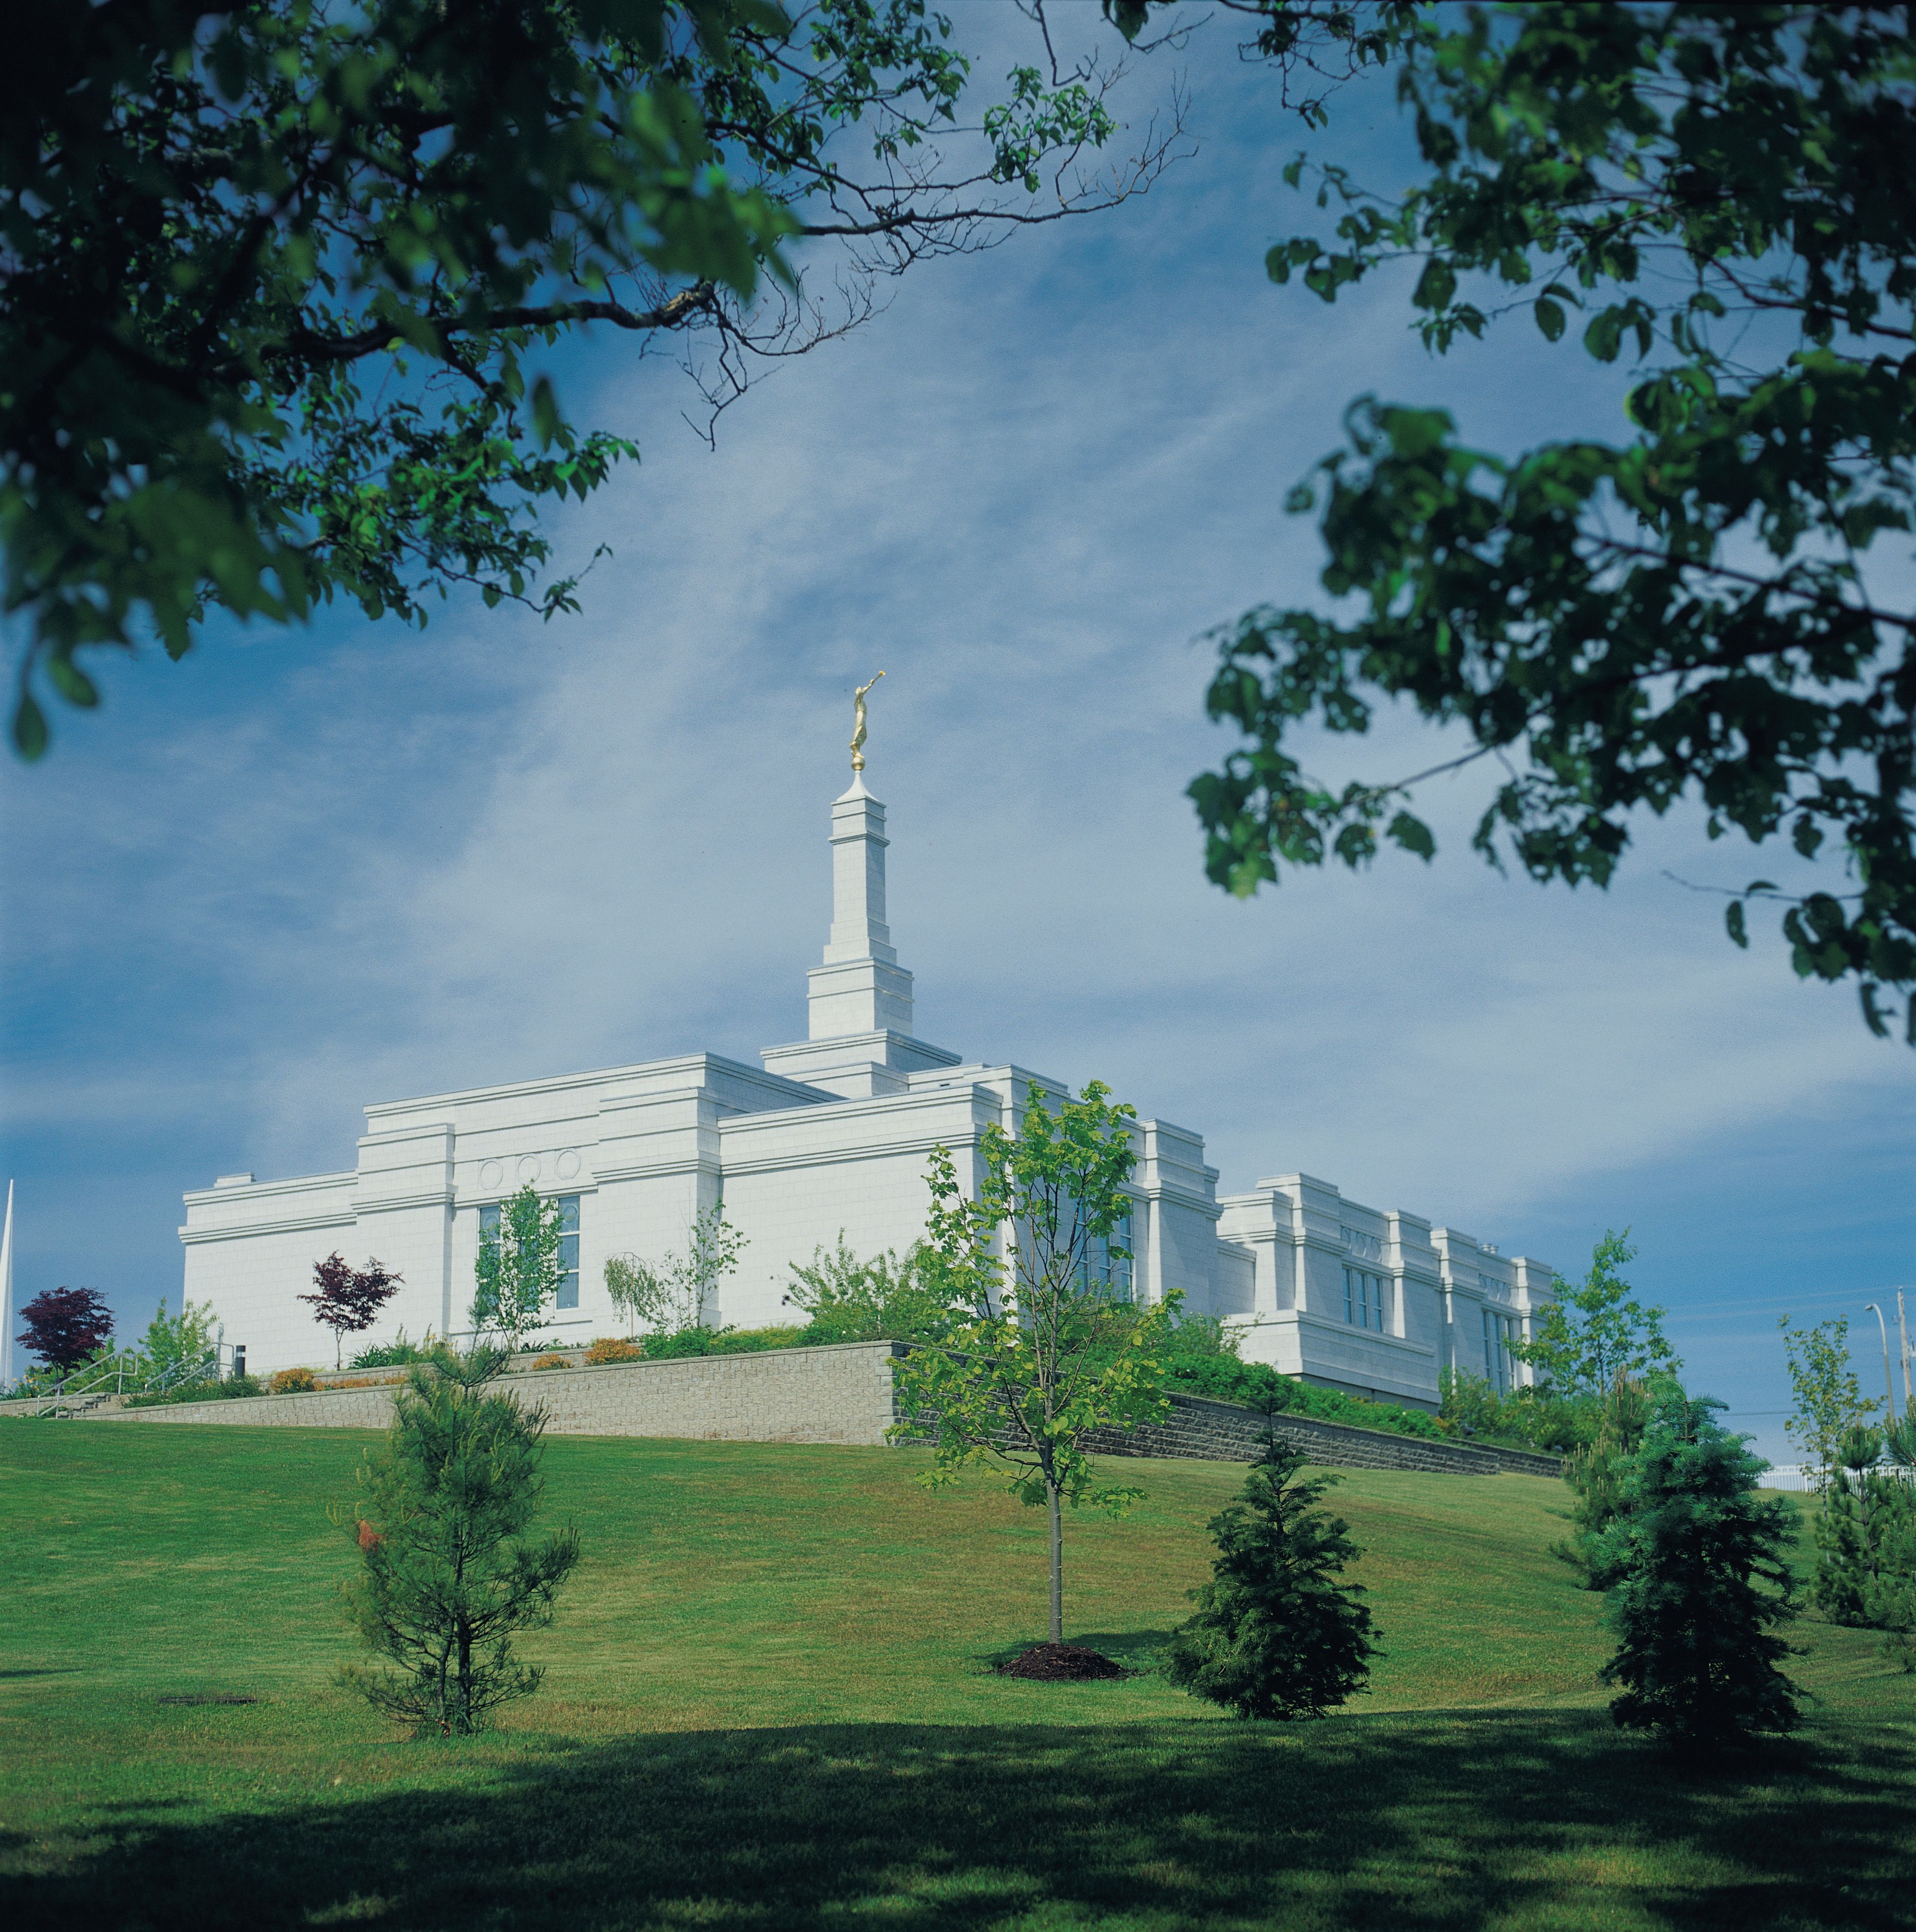 The Halifax Nova Scotia Temple and grounds in the daytime.